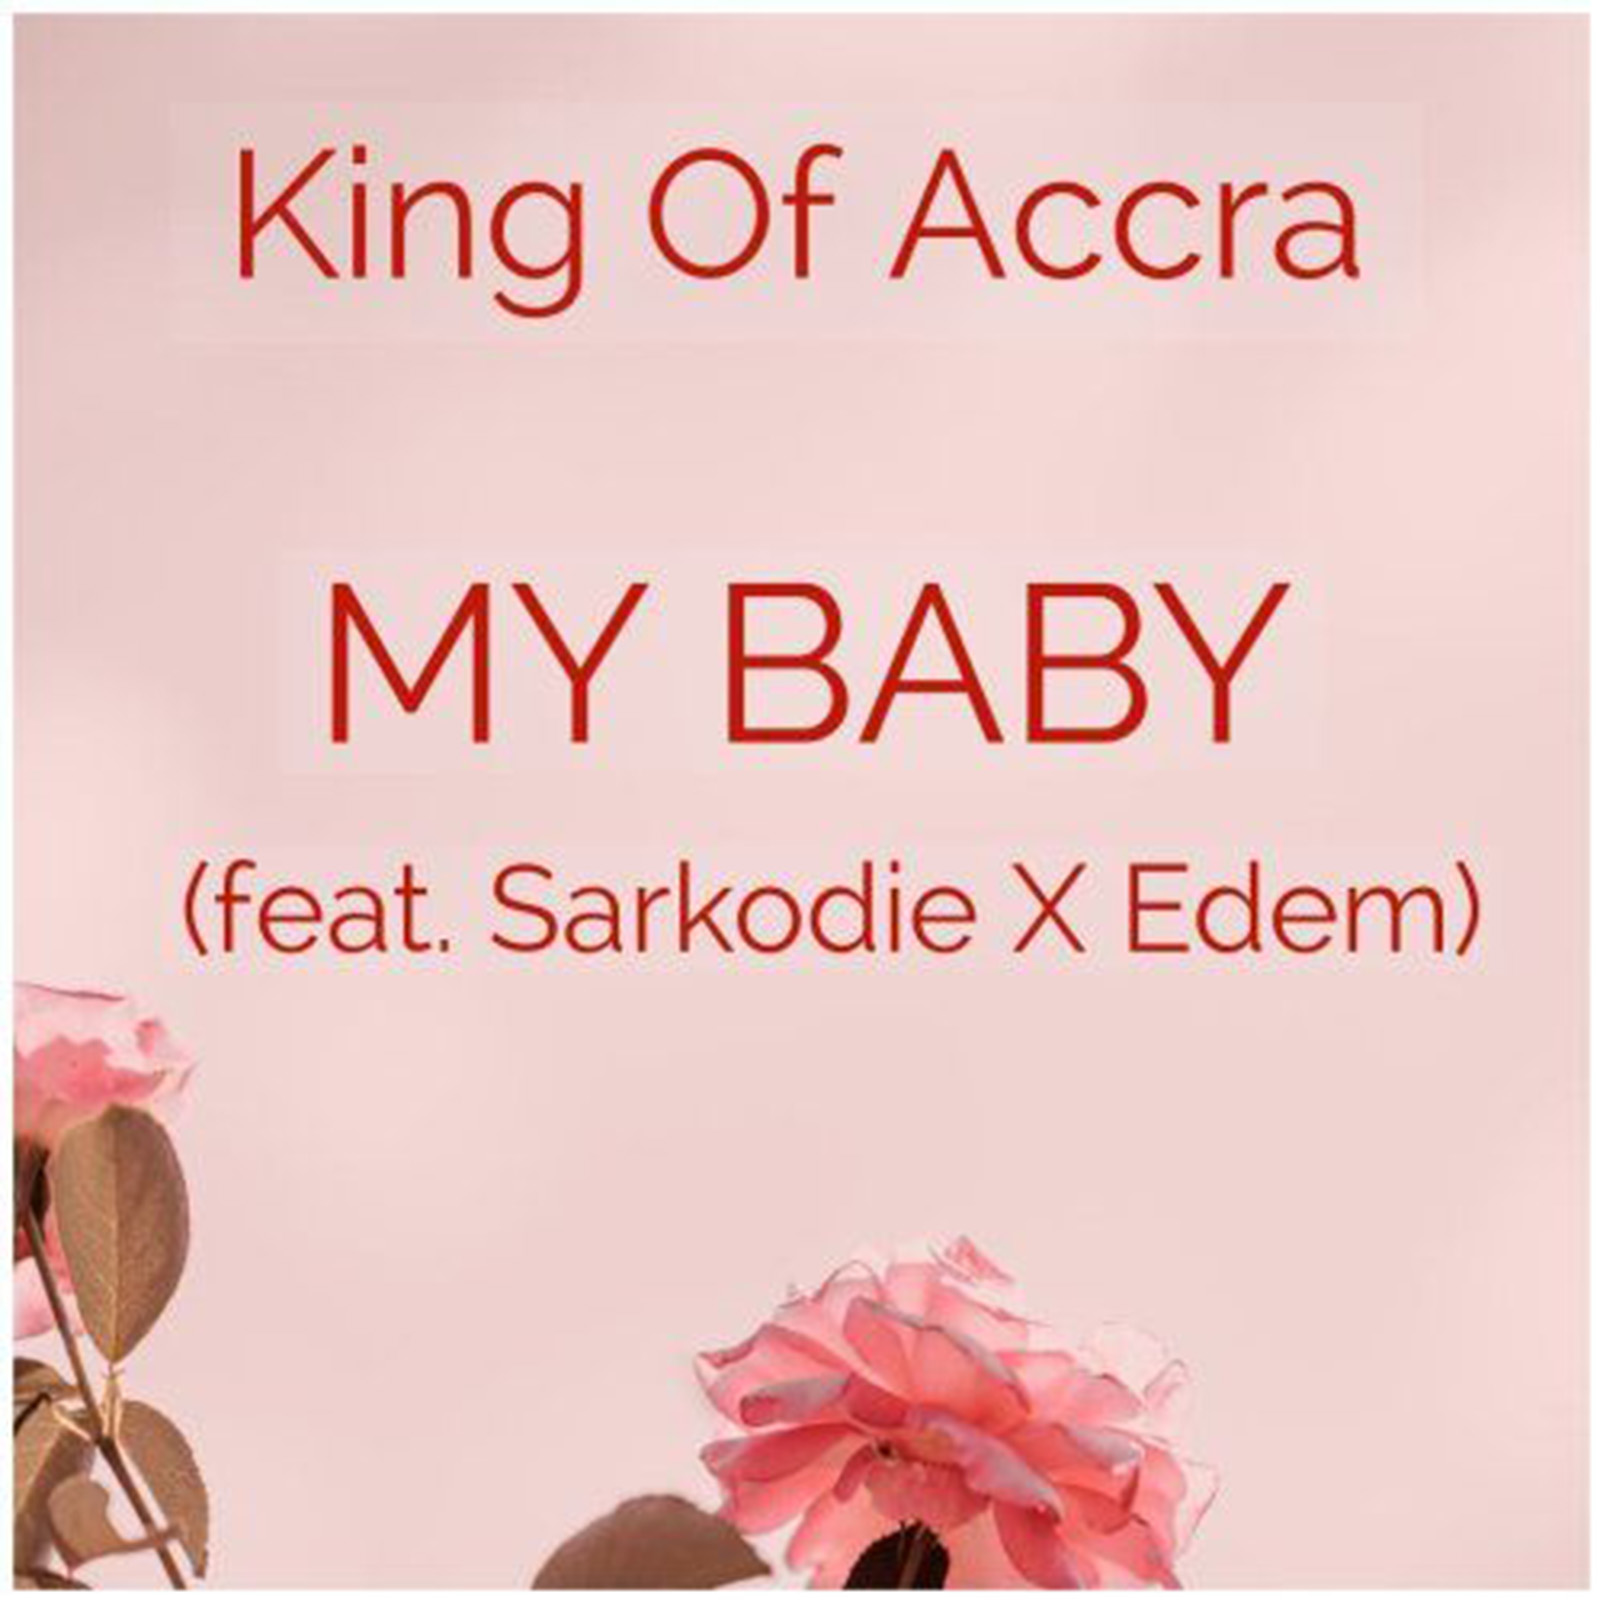 My Baby by King Of Accra feat. Sarkodie & Edem